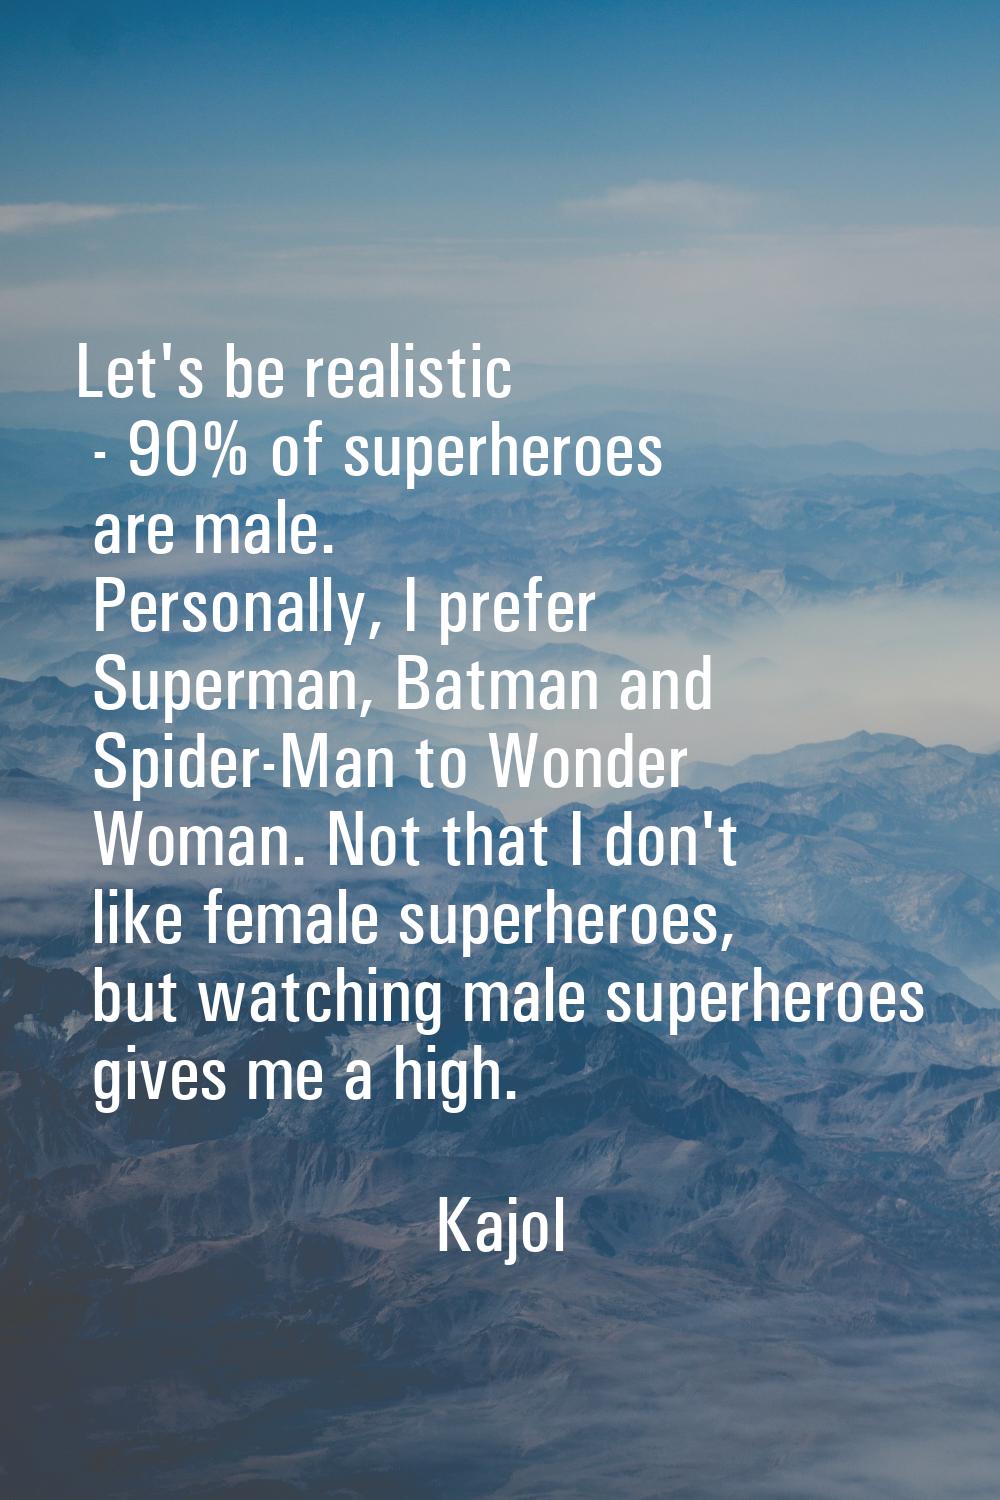 Let's be realistic - 90% of superheroes are male. Personally, I prefer Superman, Batman and Spider-